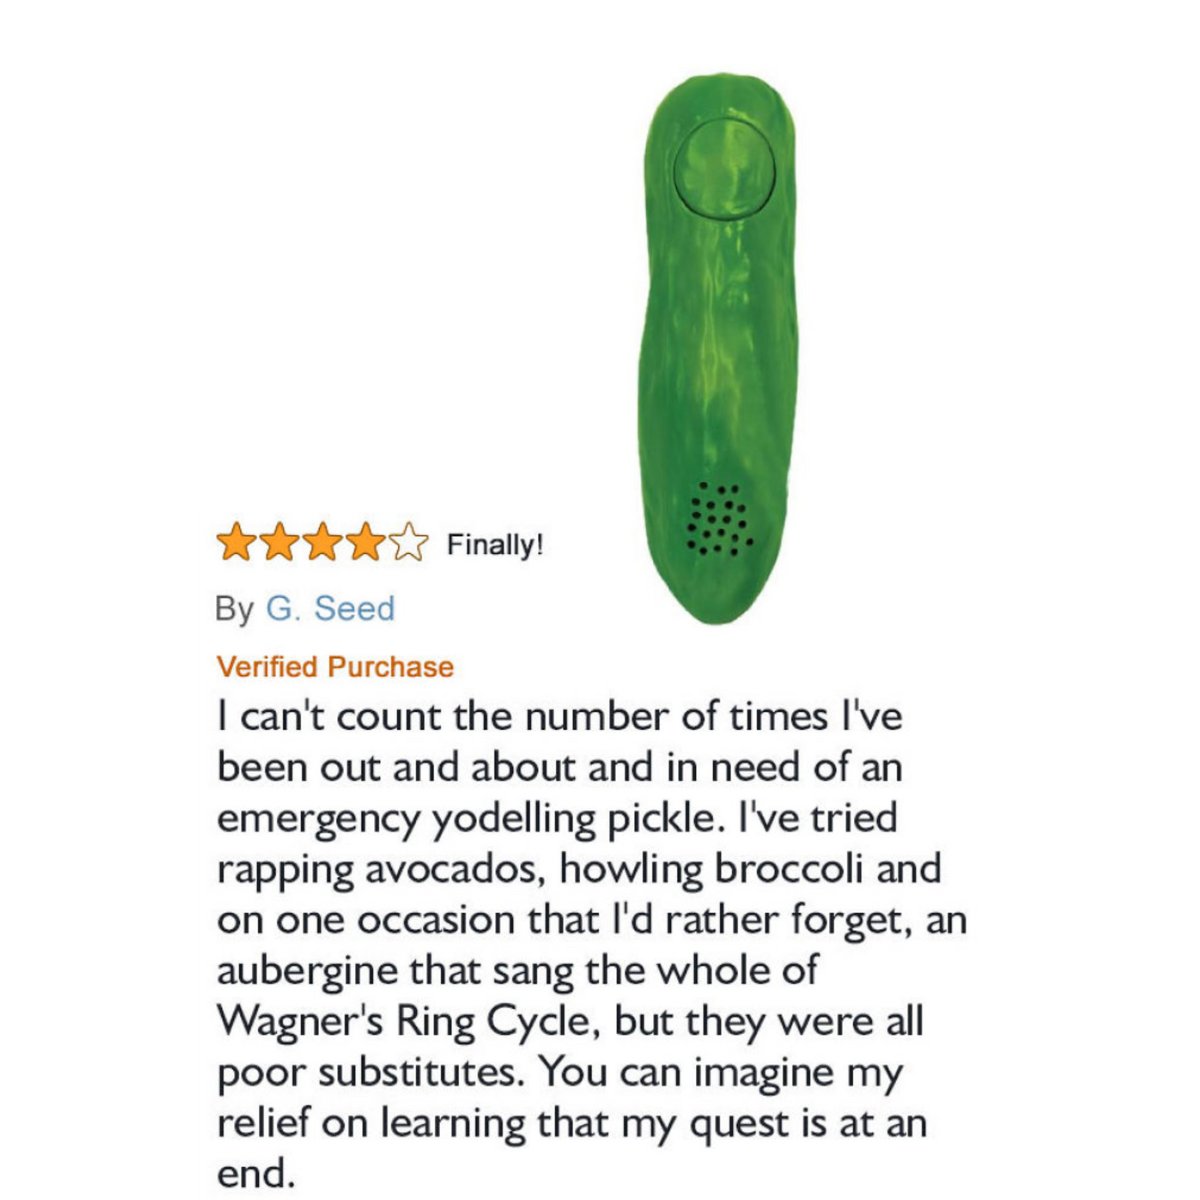 Join us for another hilarious edition of #FridayFunny 🤣 🎵🥒 Imagine how a video review would take the hilarity - and actual function of this yodeling pickle - to the next level? Calling all #brands, don’t be shy - ask your customers for a video review 🎥✨ #Amazonreviews